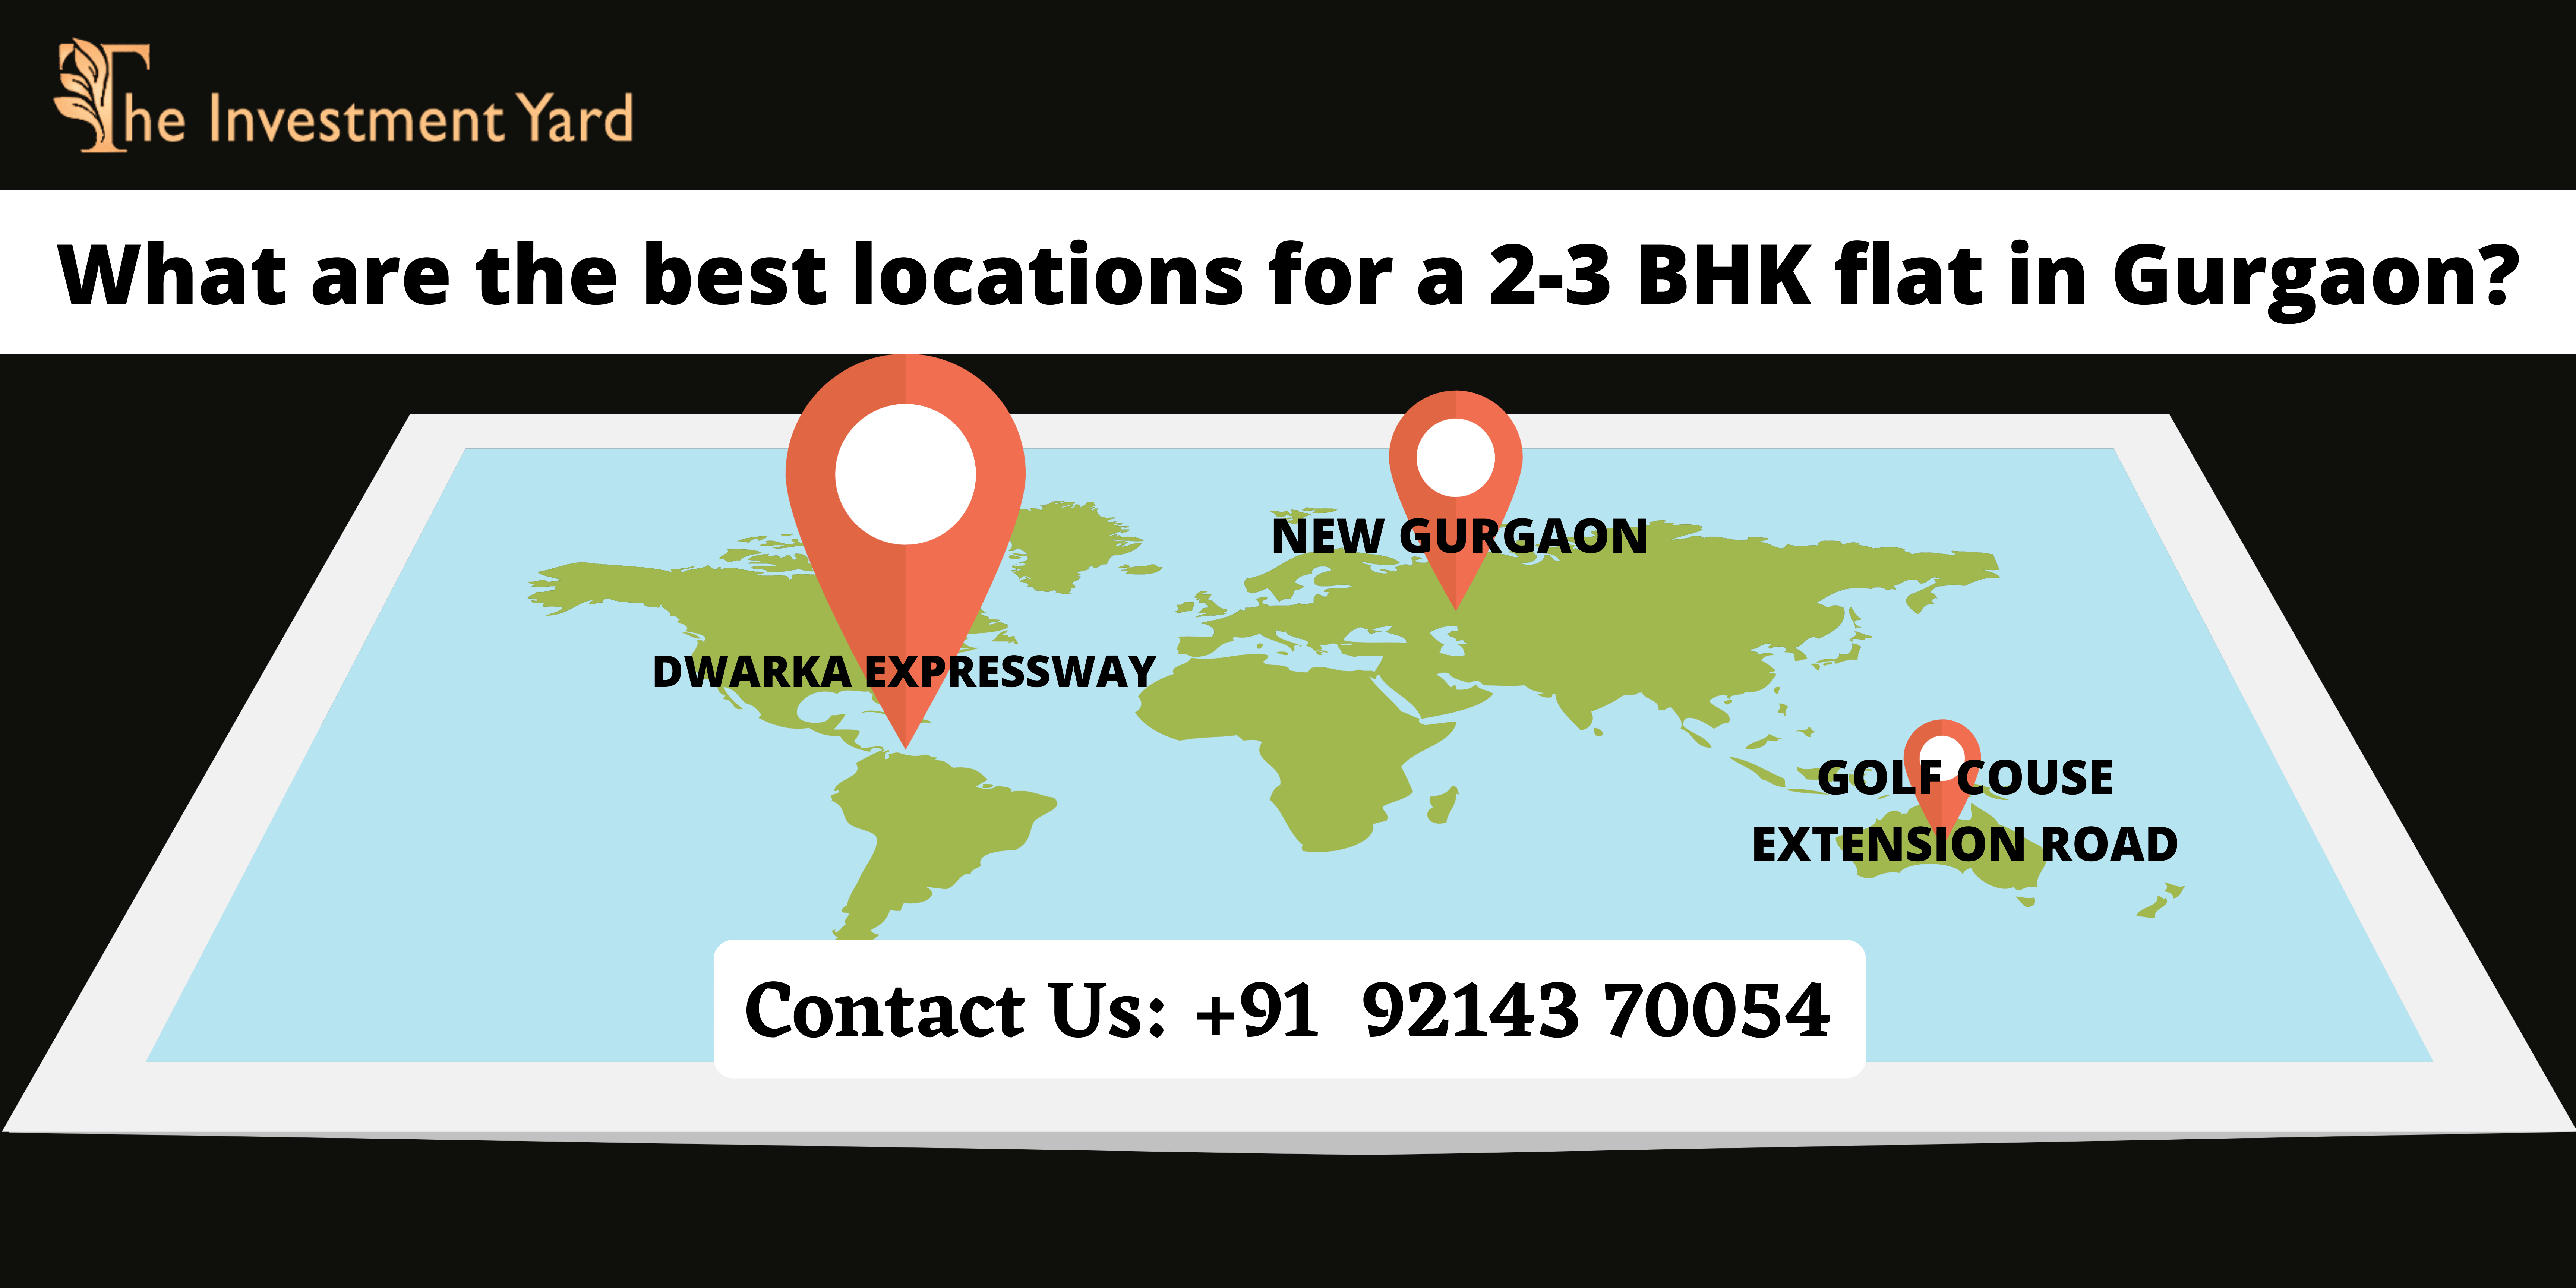 What are the best locations for a 2-3 BHK flat in Gurgaon?